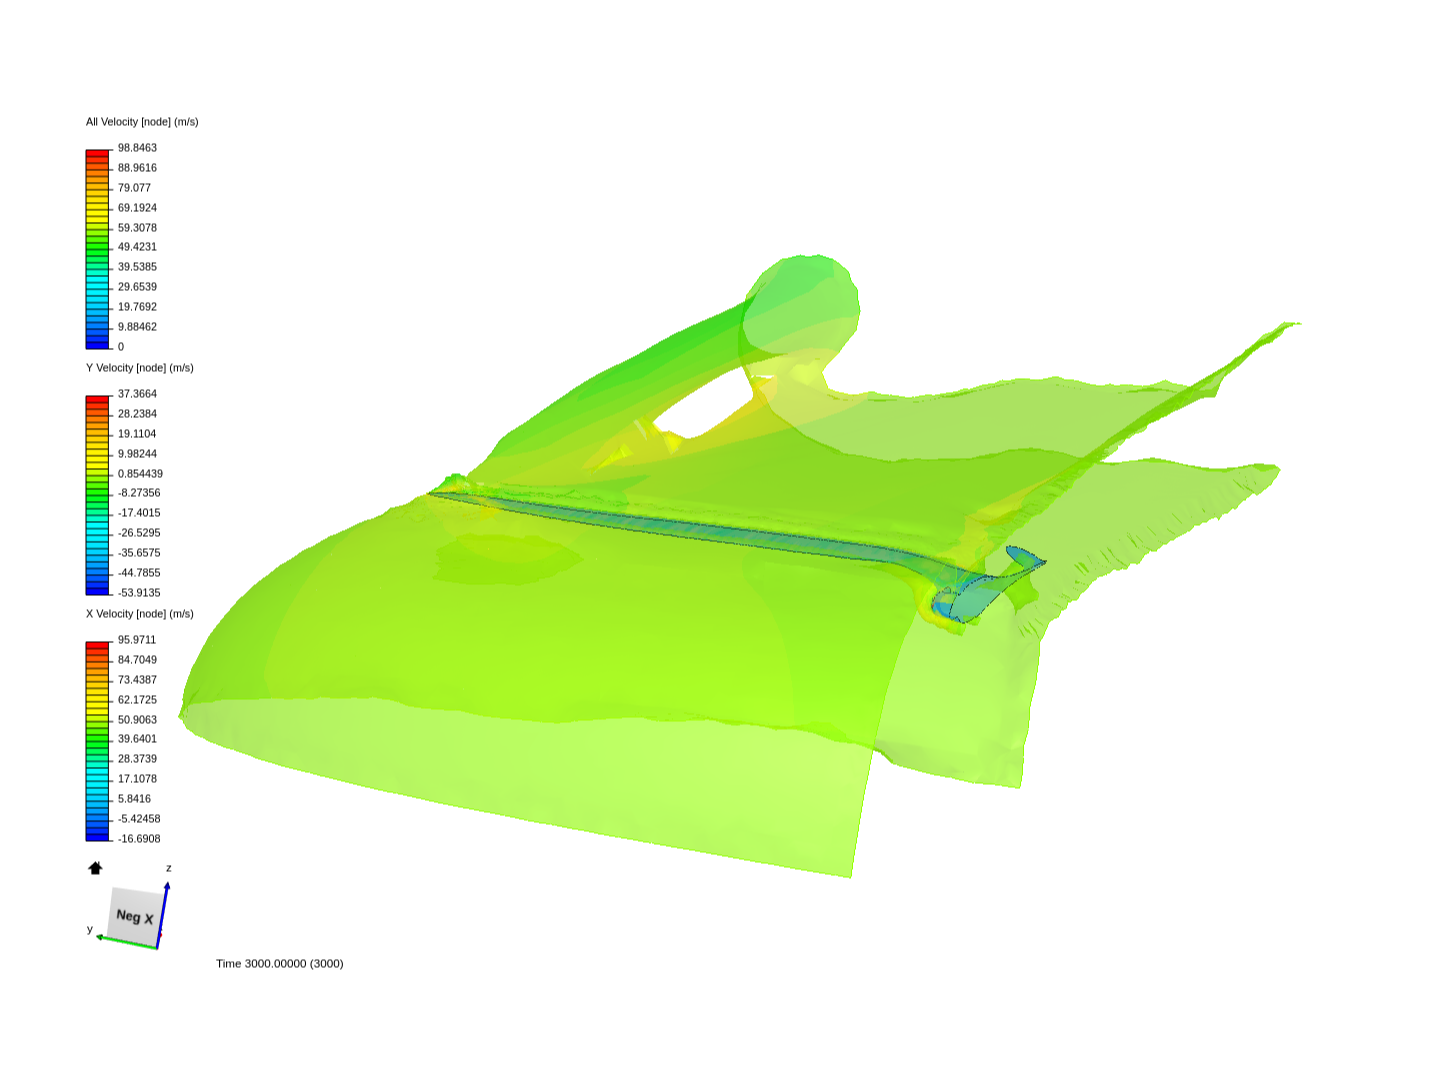 toothless_cfd image